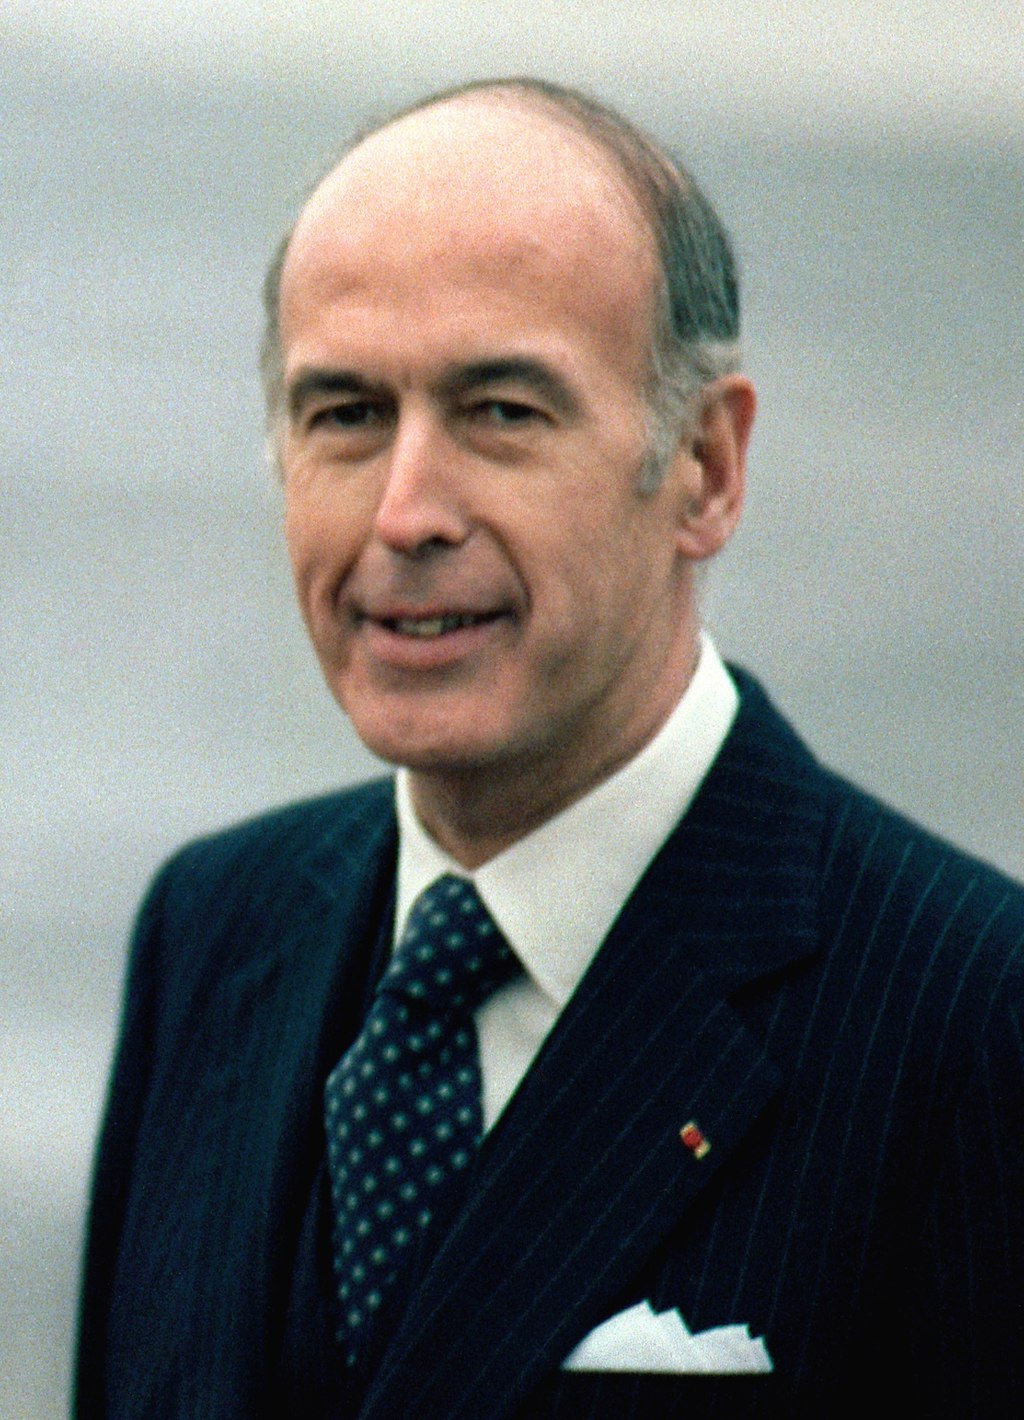 Valéry Giscard d'Estaing 3. Presidents of the Fifth Republic of France